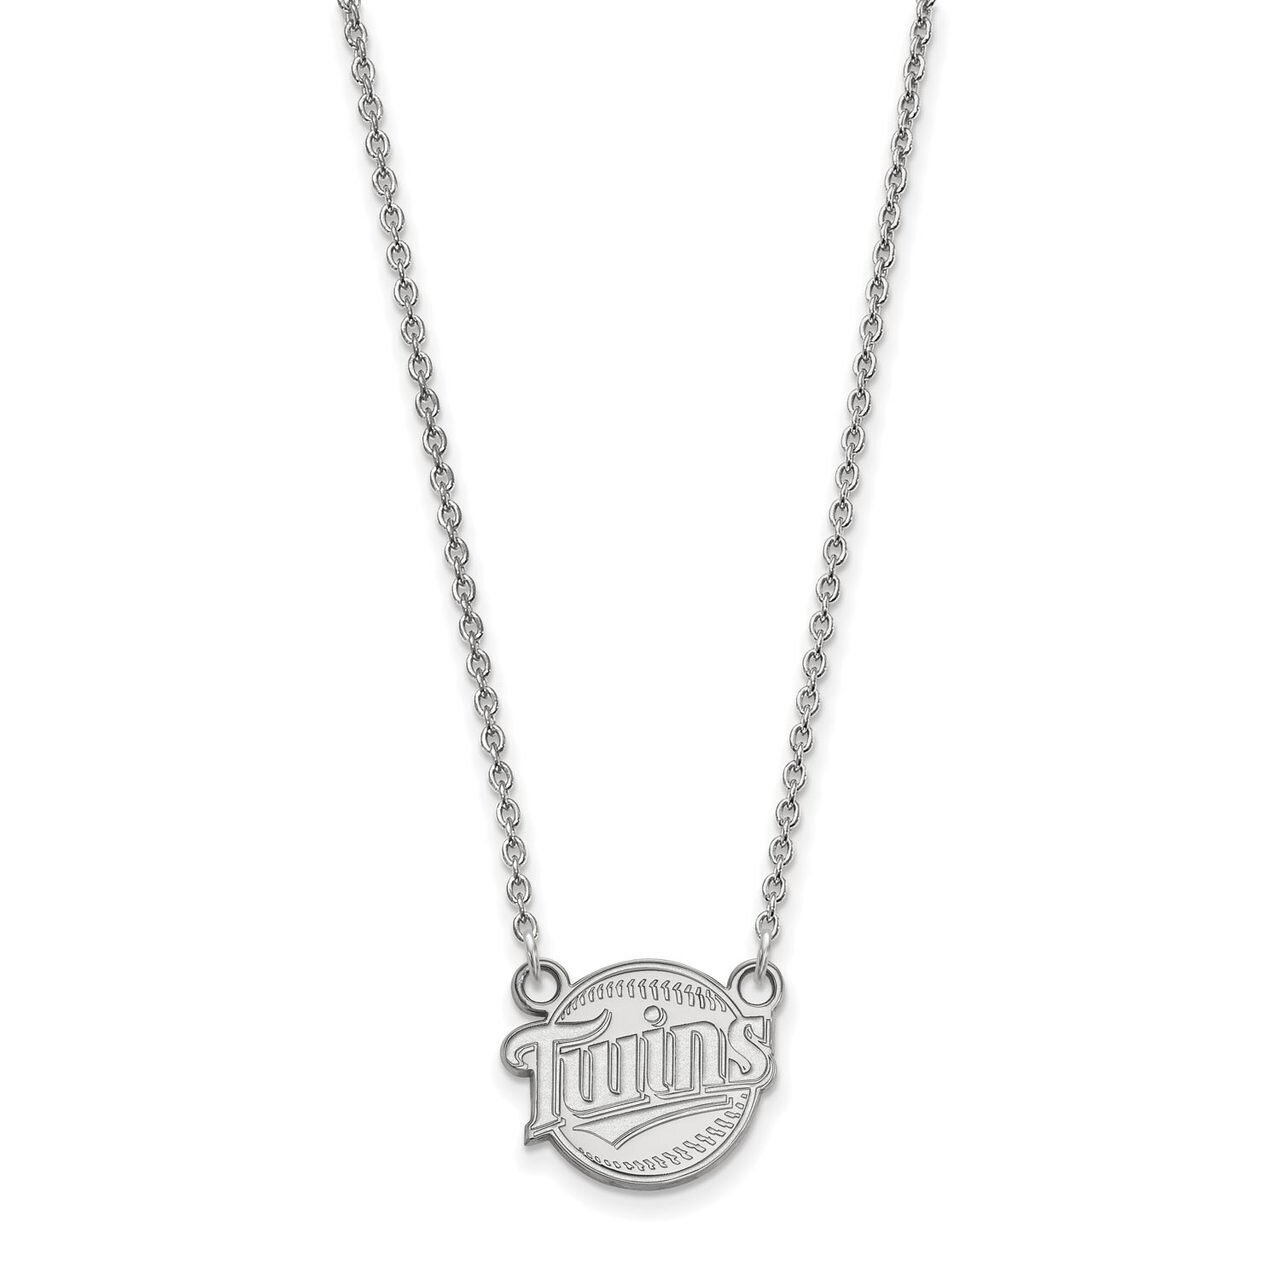 Minnesota Twins Small Pendant with Chain Necklace 14k White Gold 4W022TWN-18